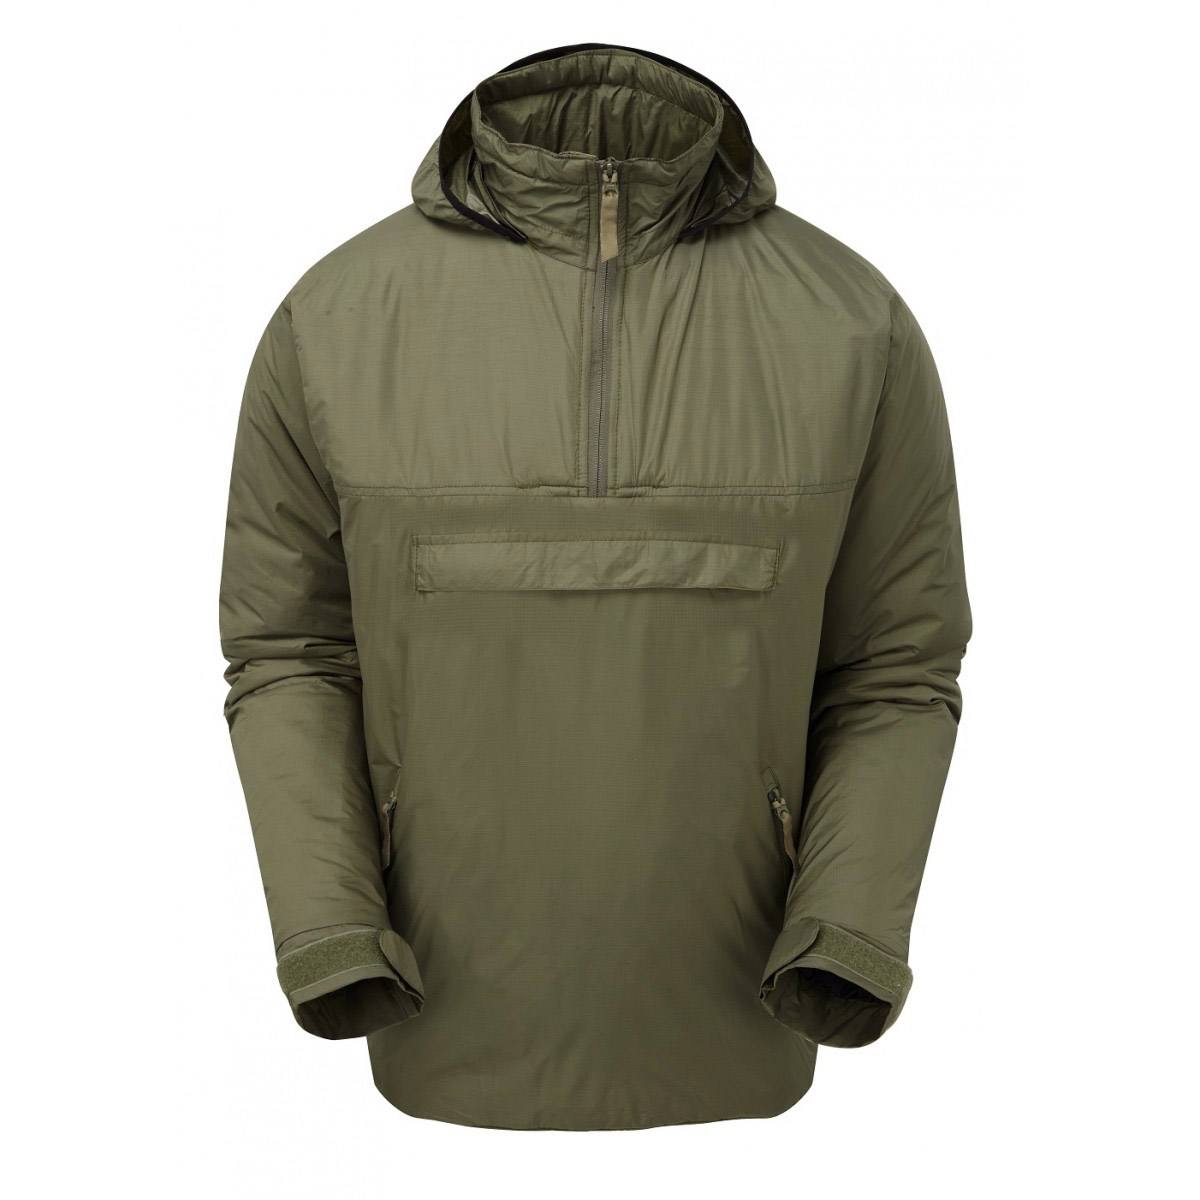 Best Midweight (~700g) Insulated Jacket - Scramble Kit - Tested, Rated ...